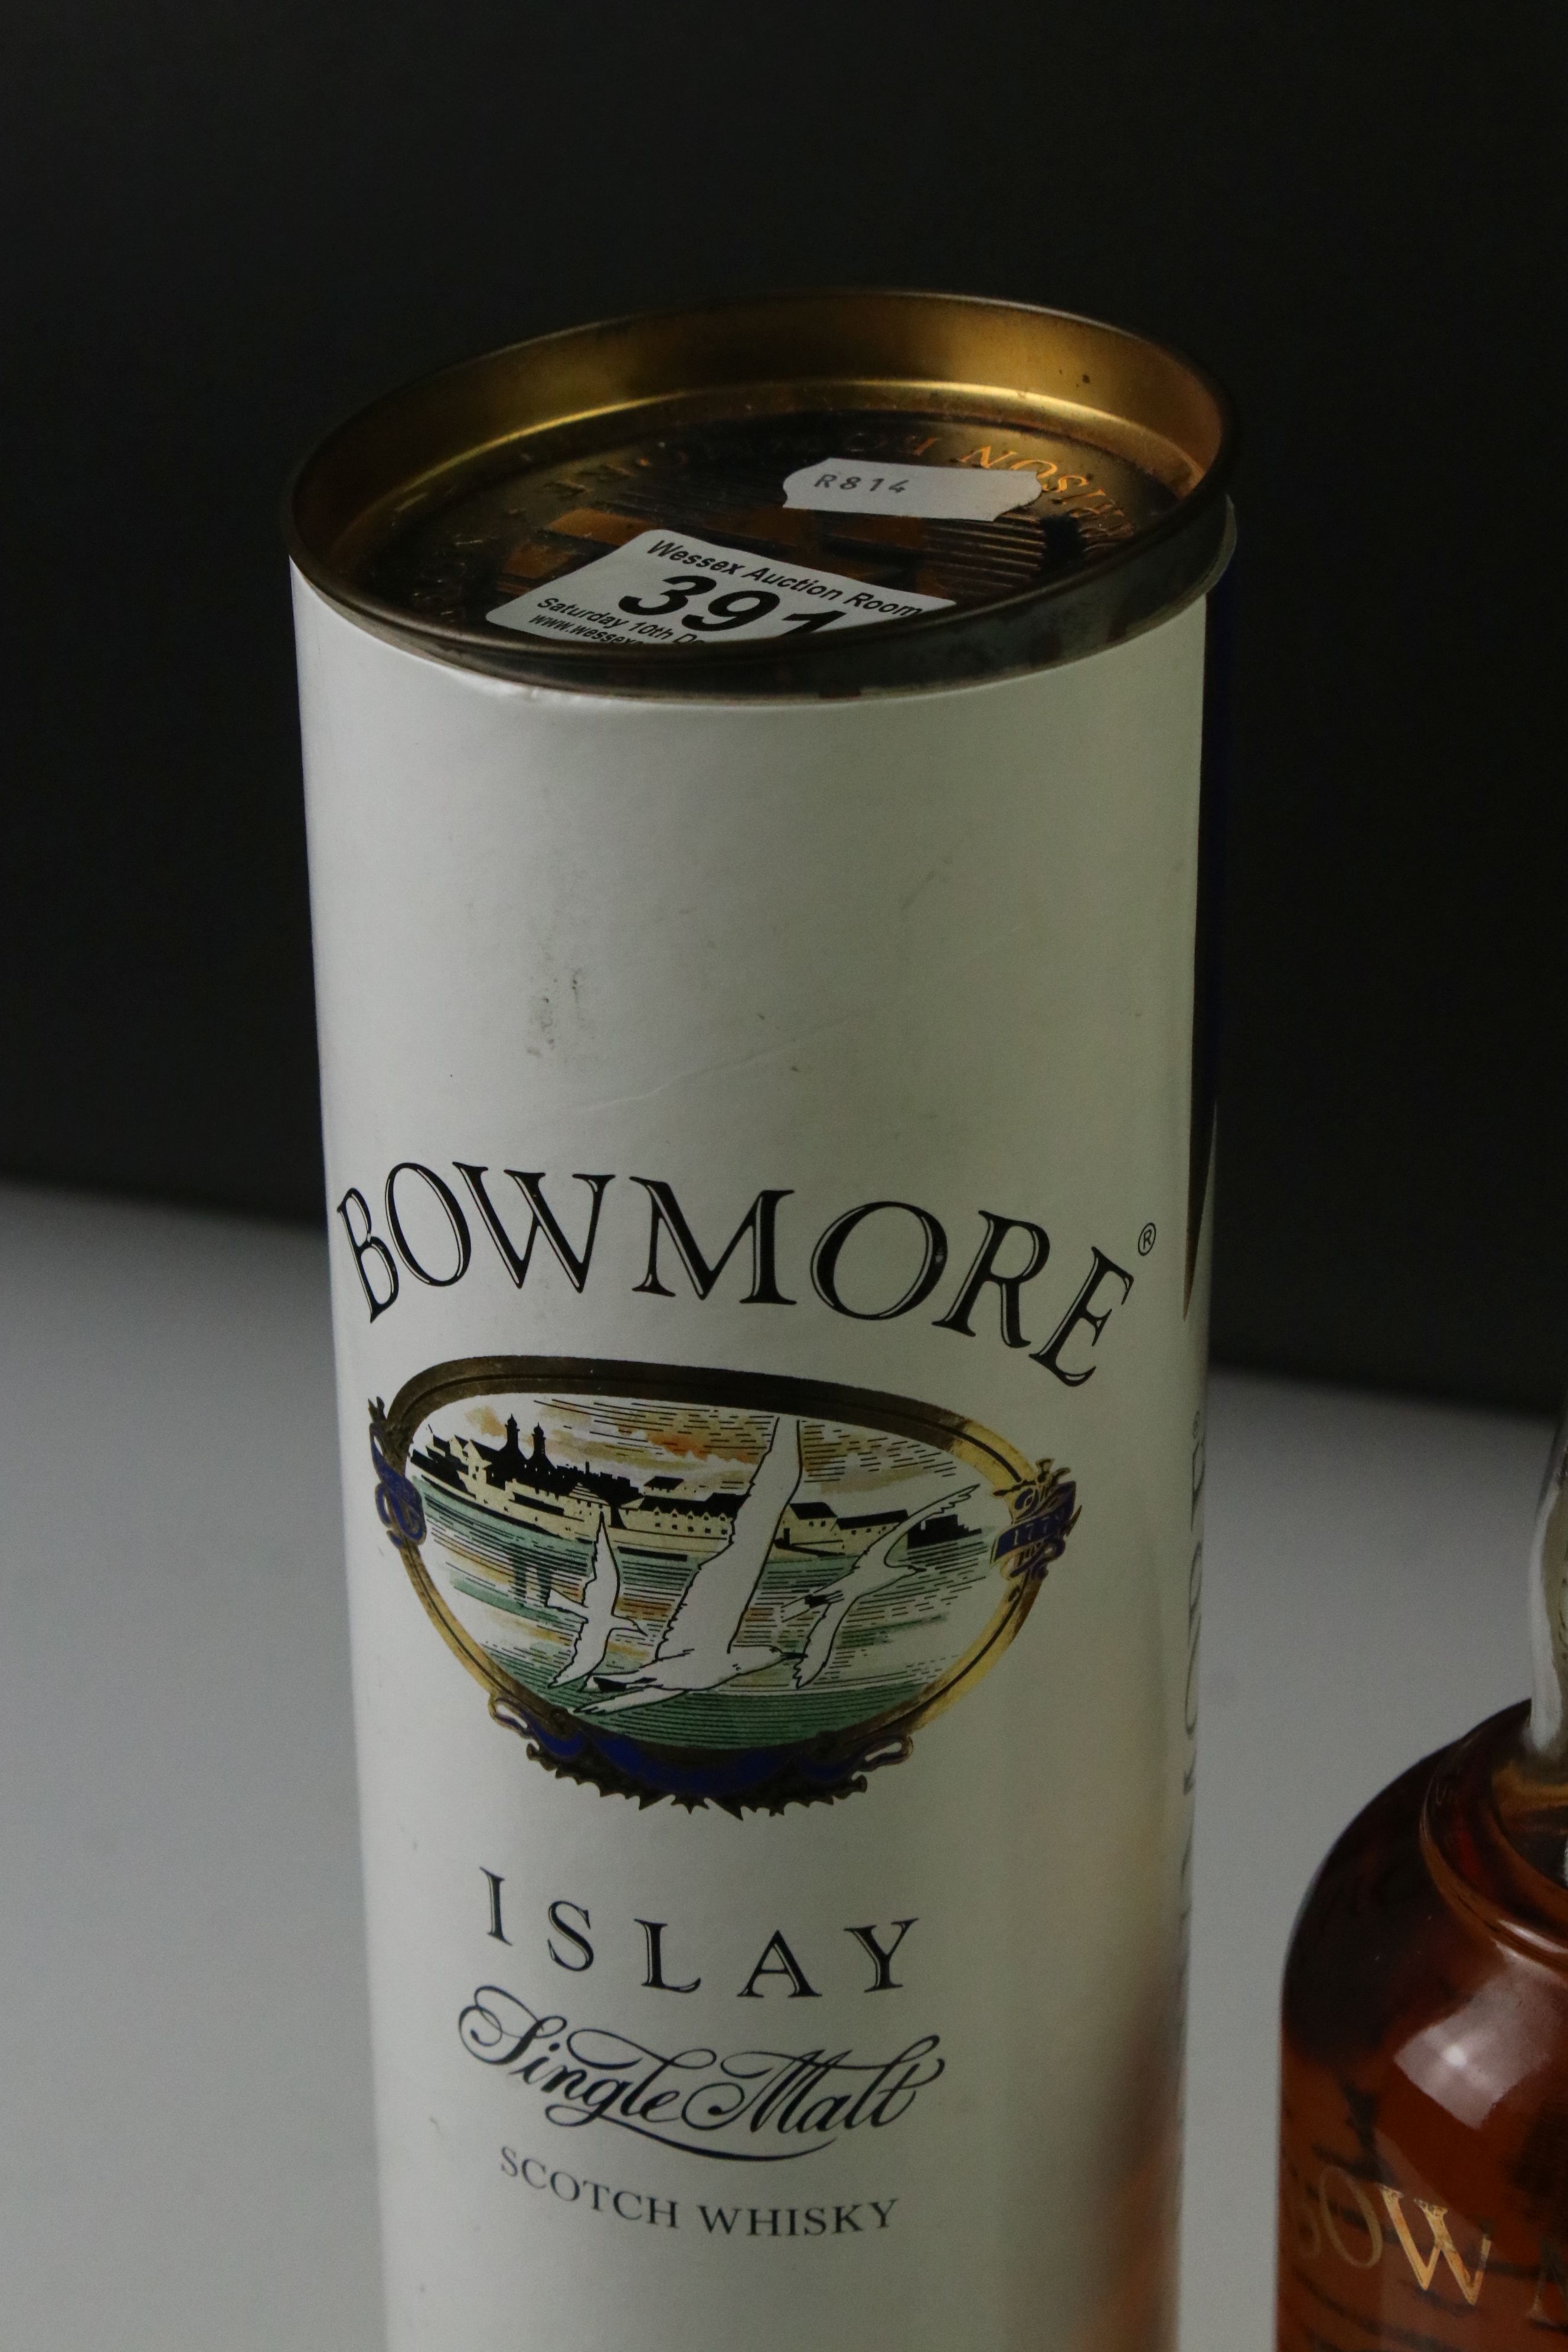 Whisky - 70cl Bottle of Bowmore Islay Single Malt 17 years old in box - Image 4 of 4